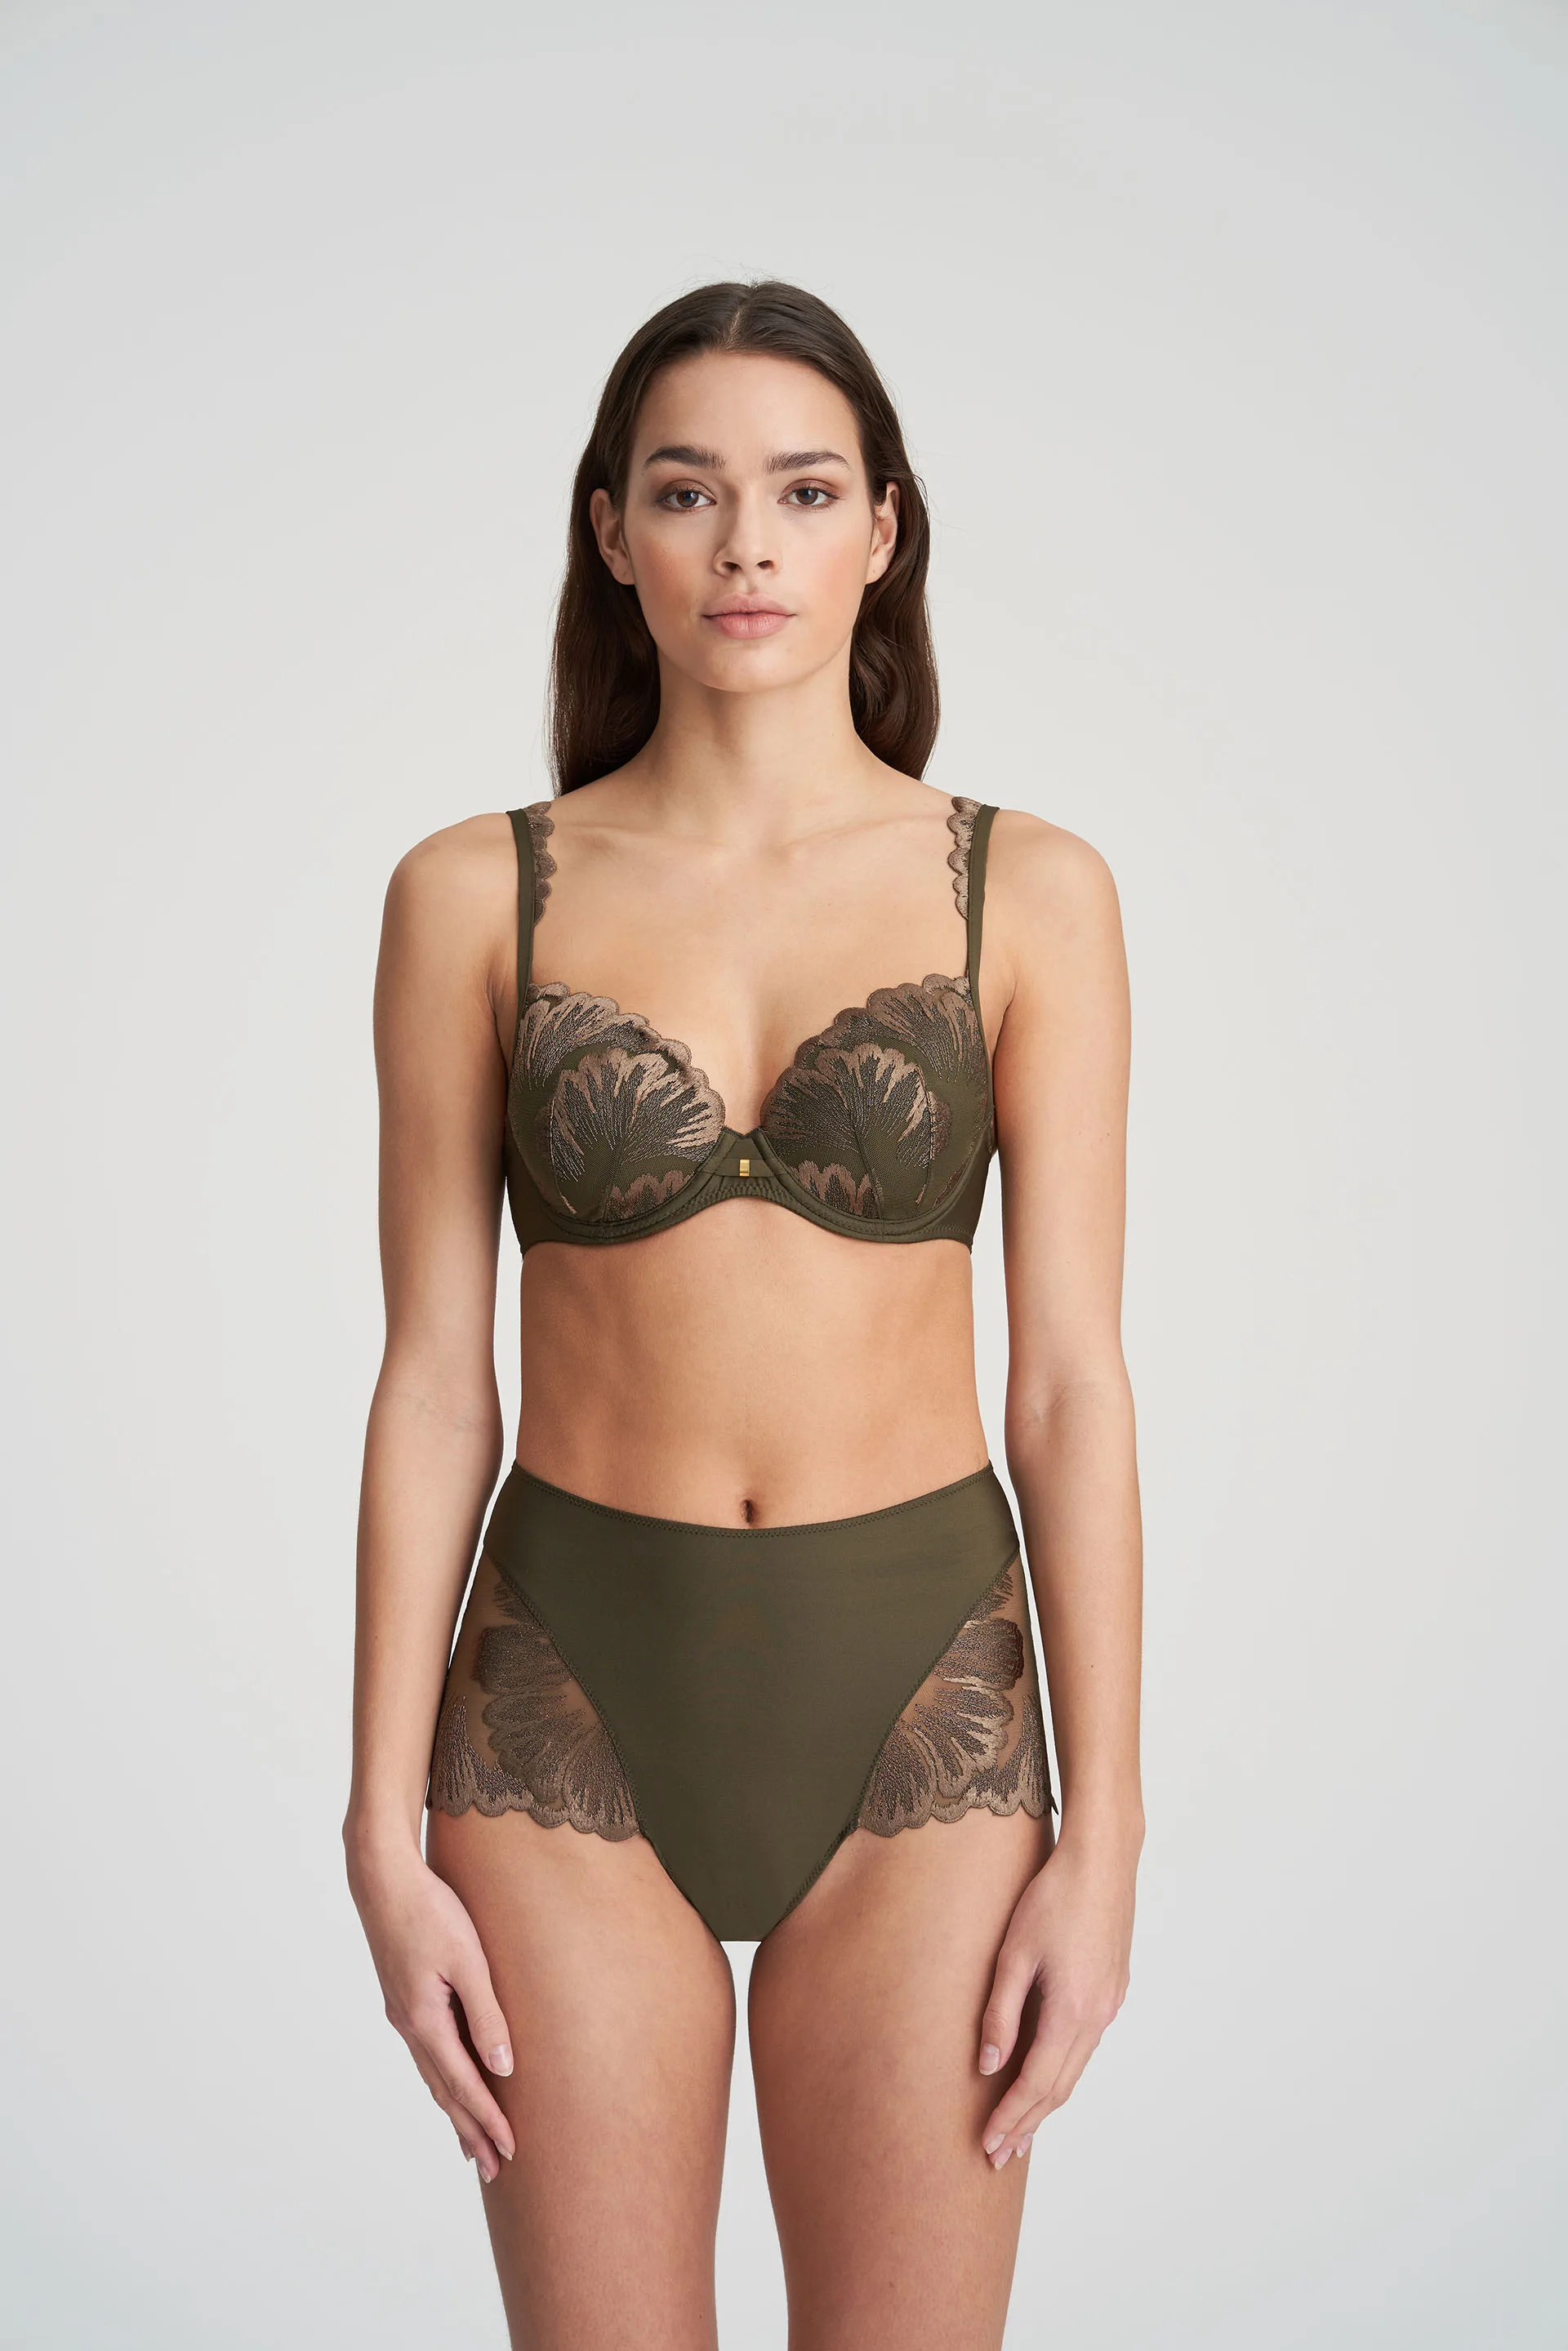 Buy Padded Non-Wired Full Cup Bra in Olive Green - Lace Online